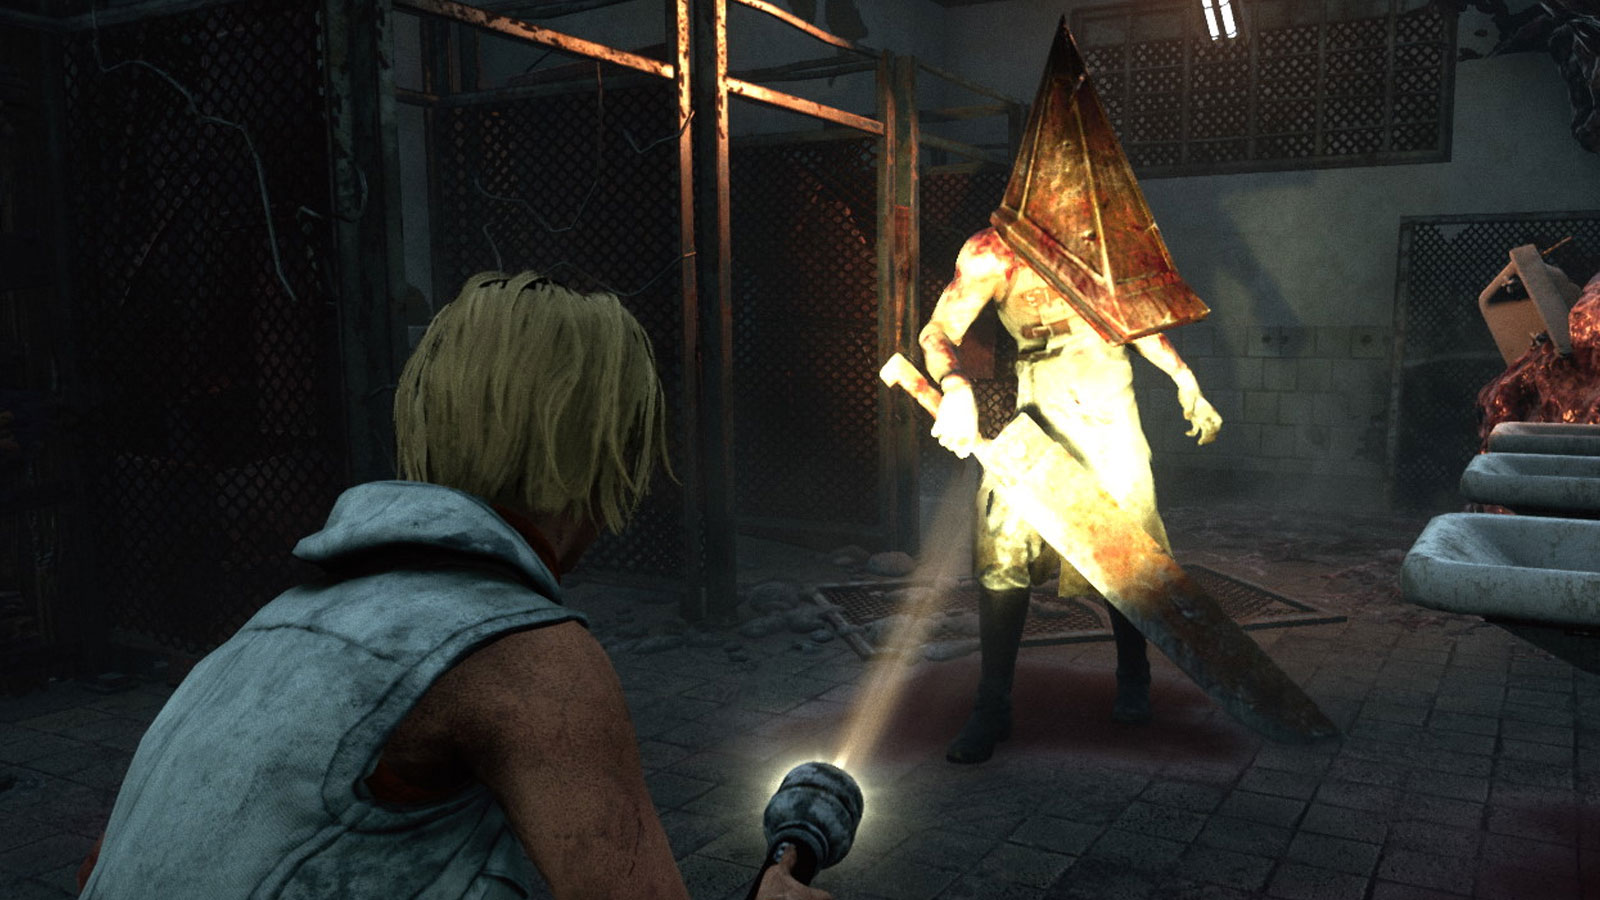 Leaker claims Silent Hill reboot will be announced for PS5 soon - Dexerto